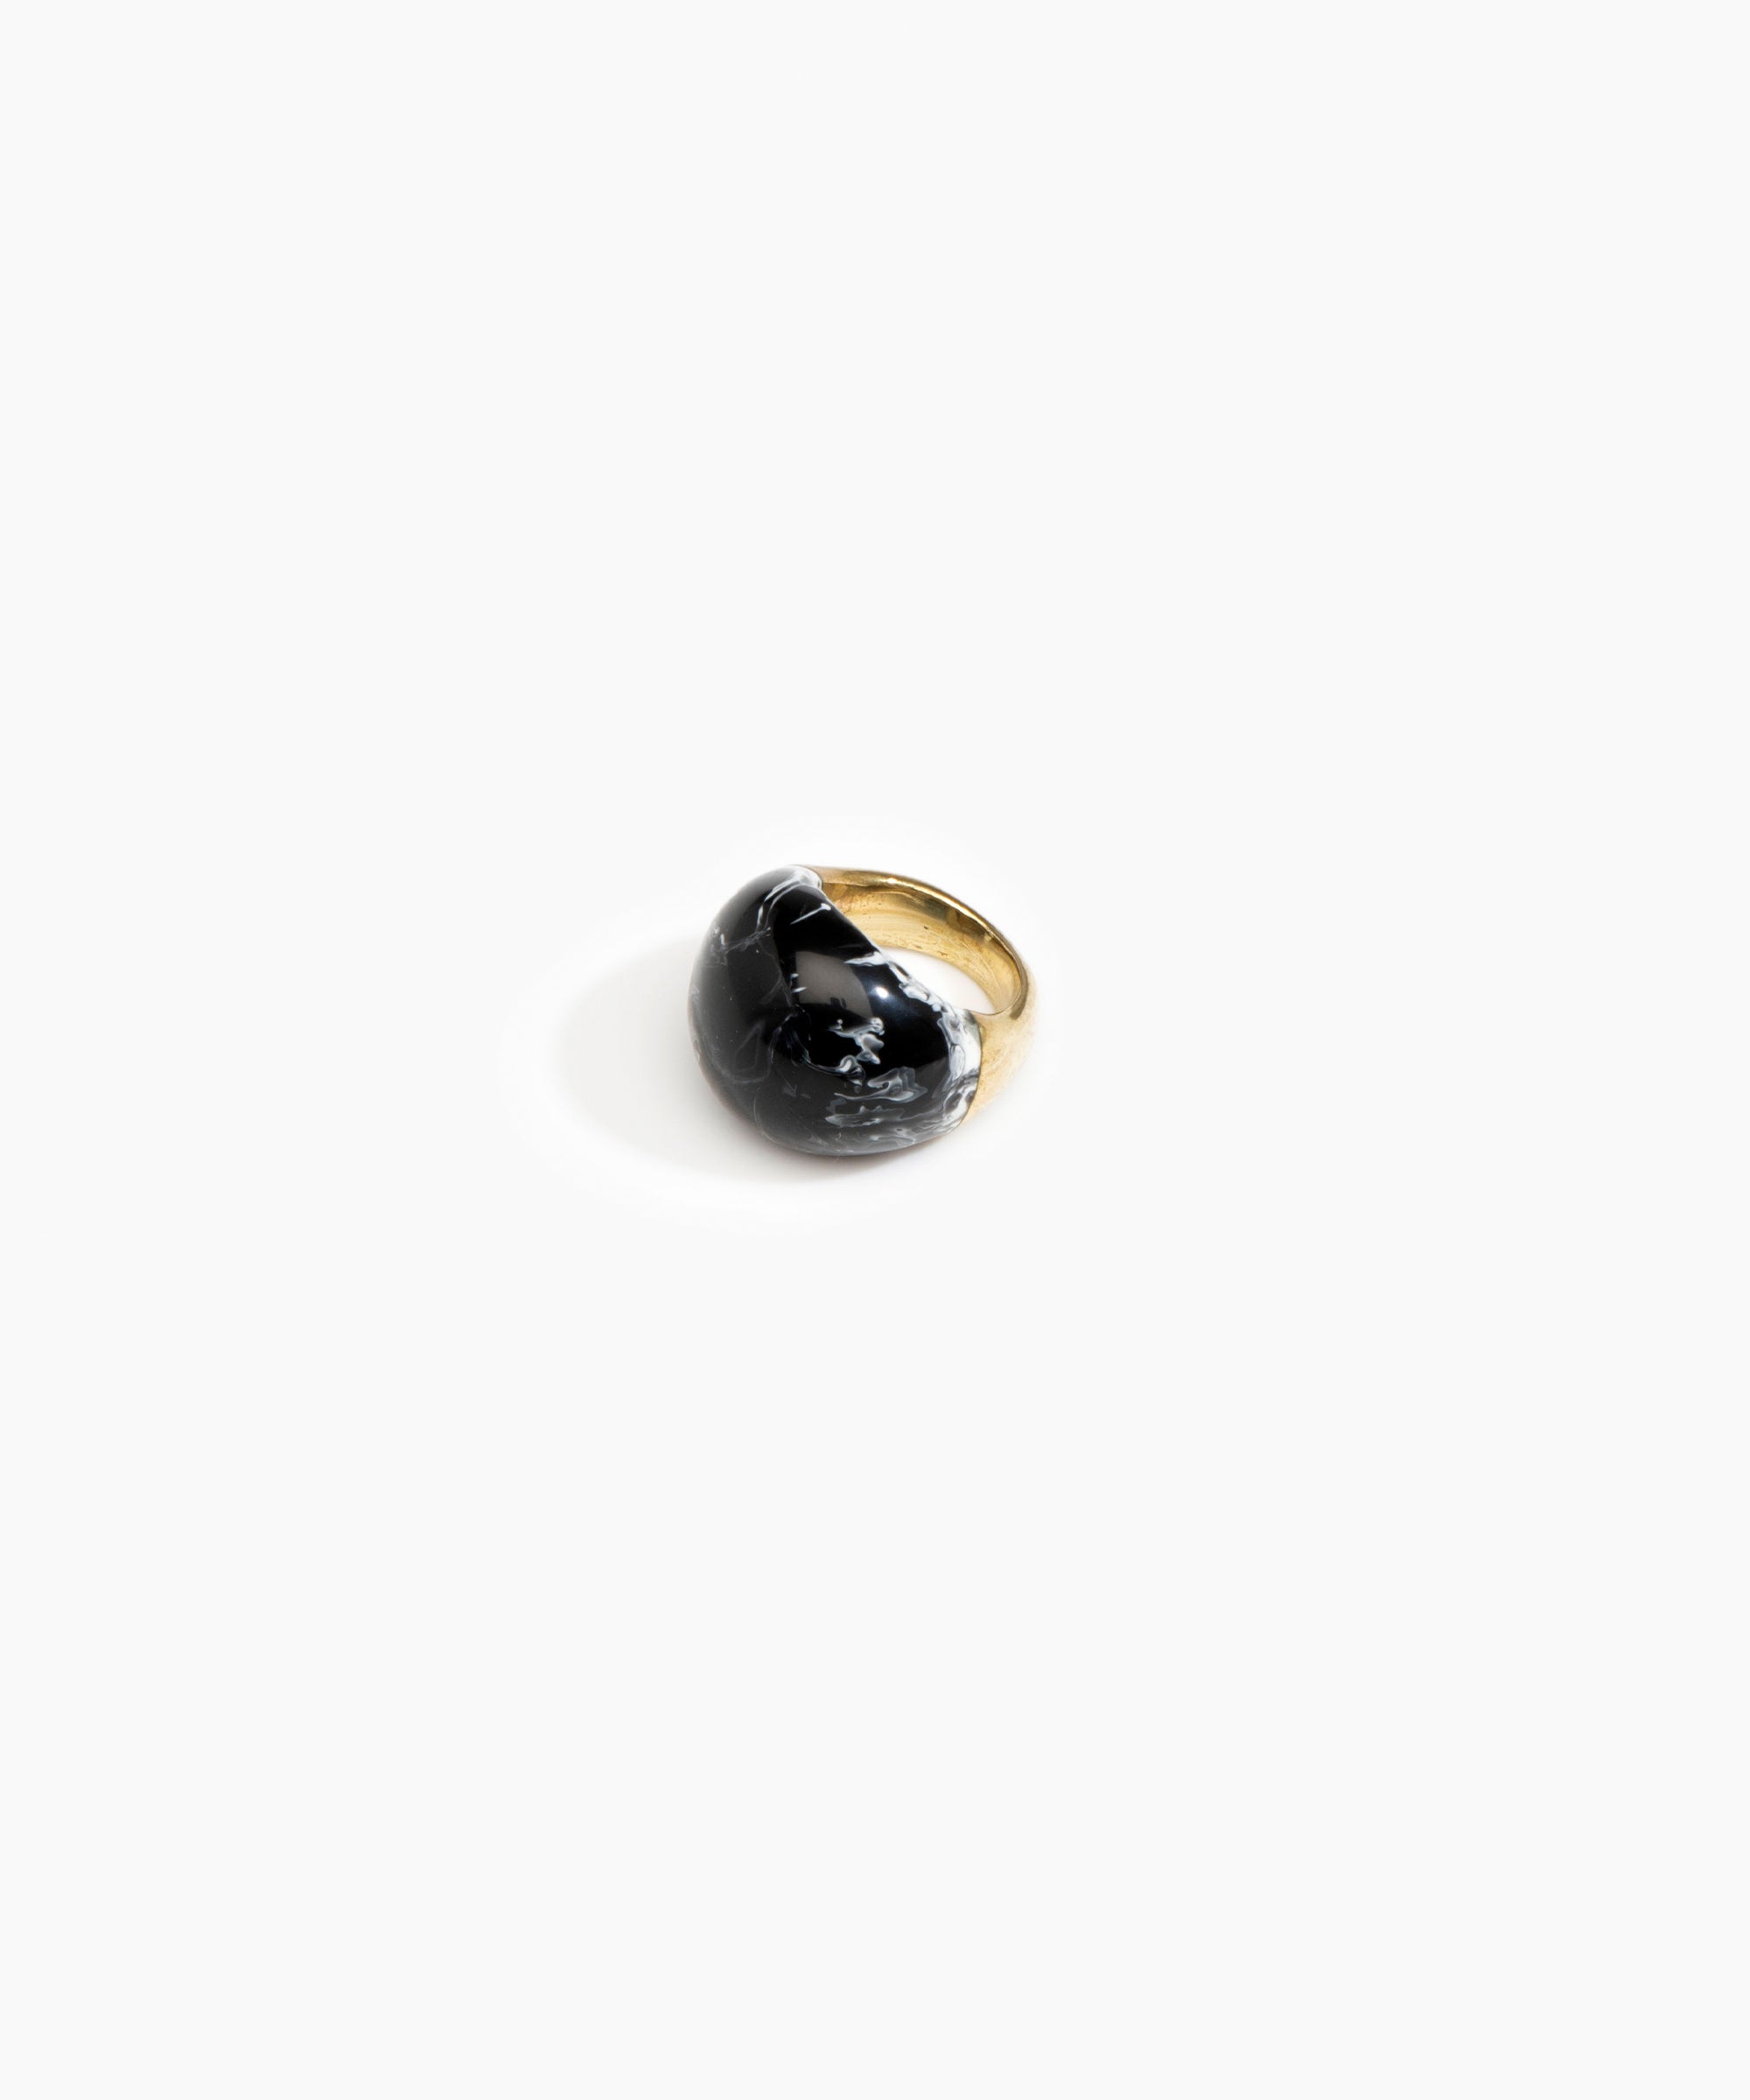 Dinosaur Designs Large Horn Ring Rings in Black Marble color resin with Nano-Coated Brass Material